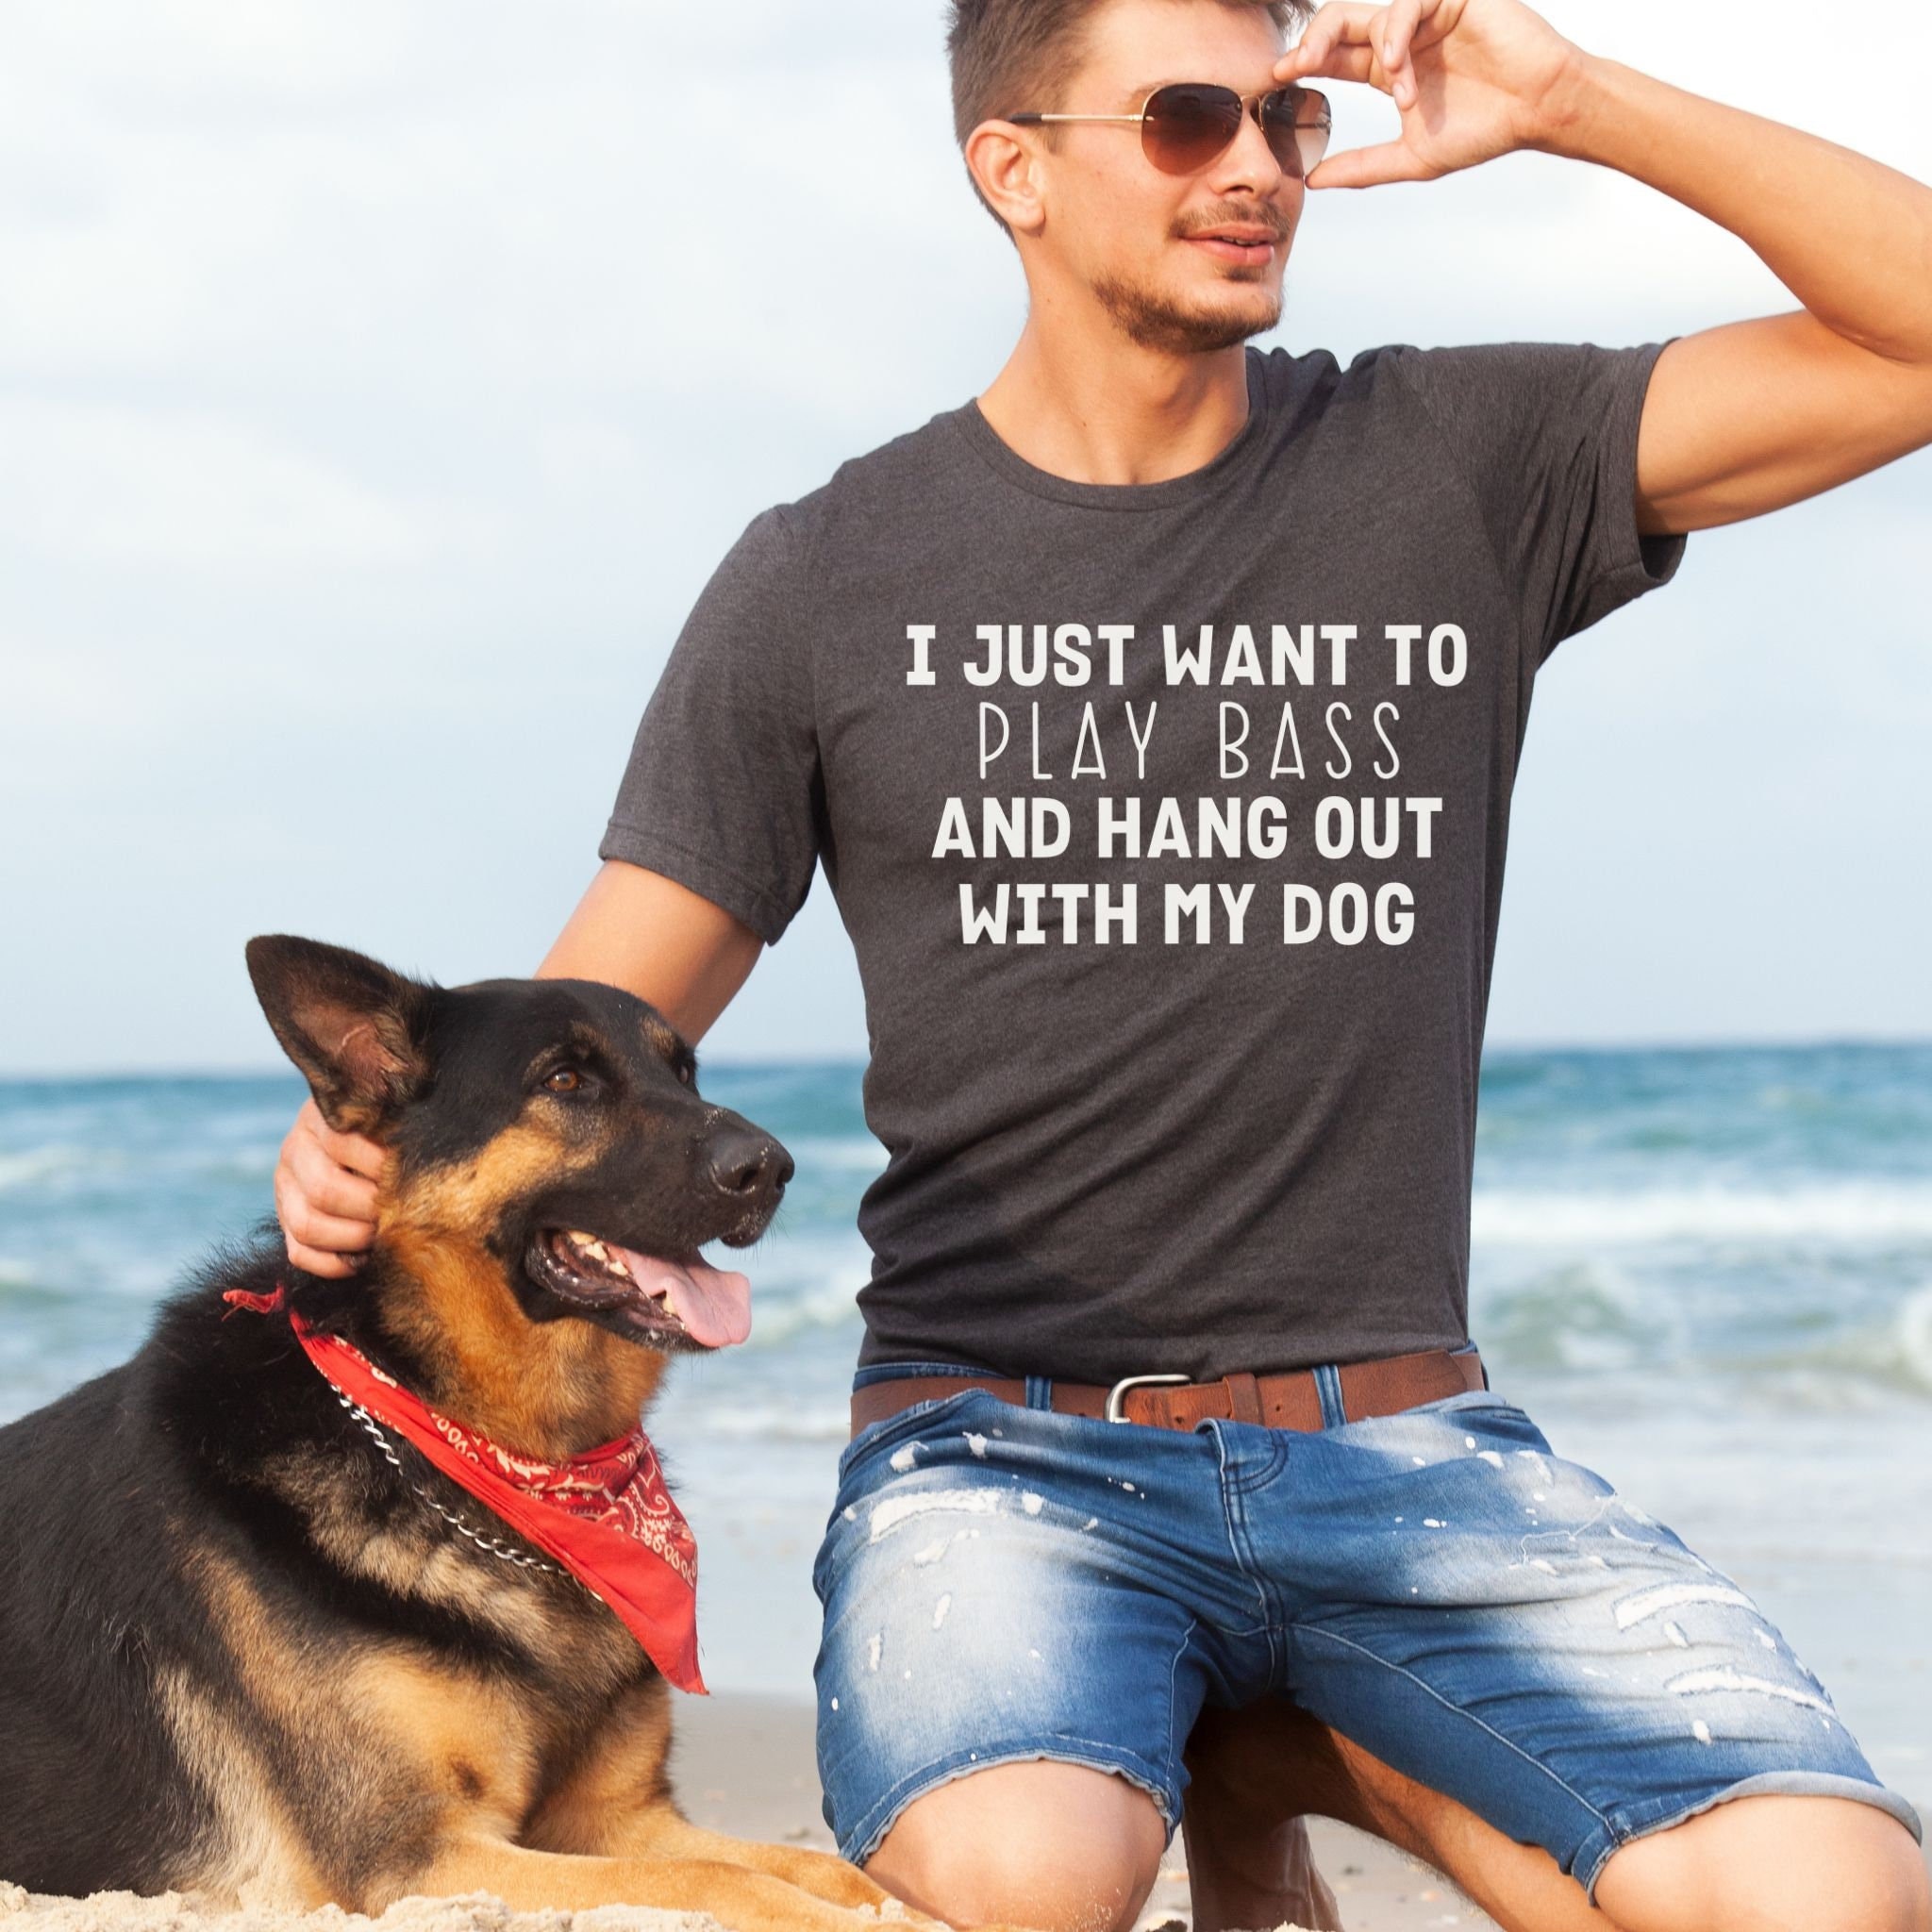 I like dogs and bass fishing and maybe 3 people shirt, hoodie, sweater,  long sleeve and tank top